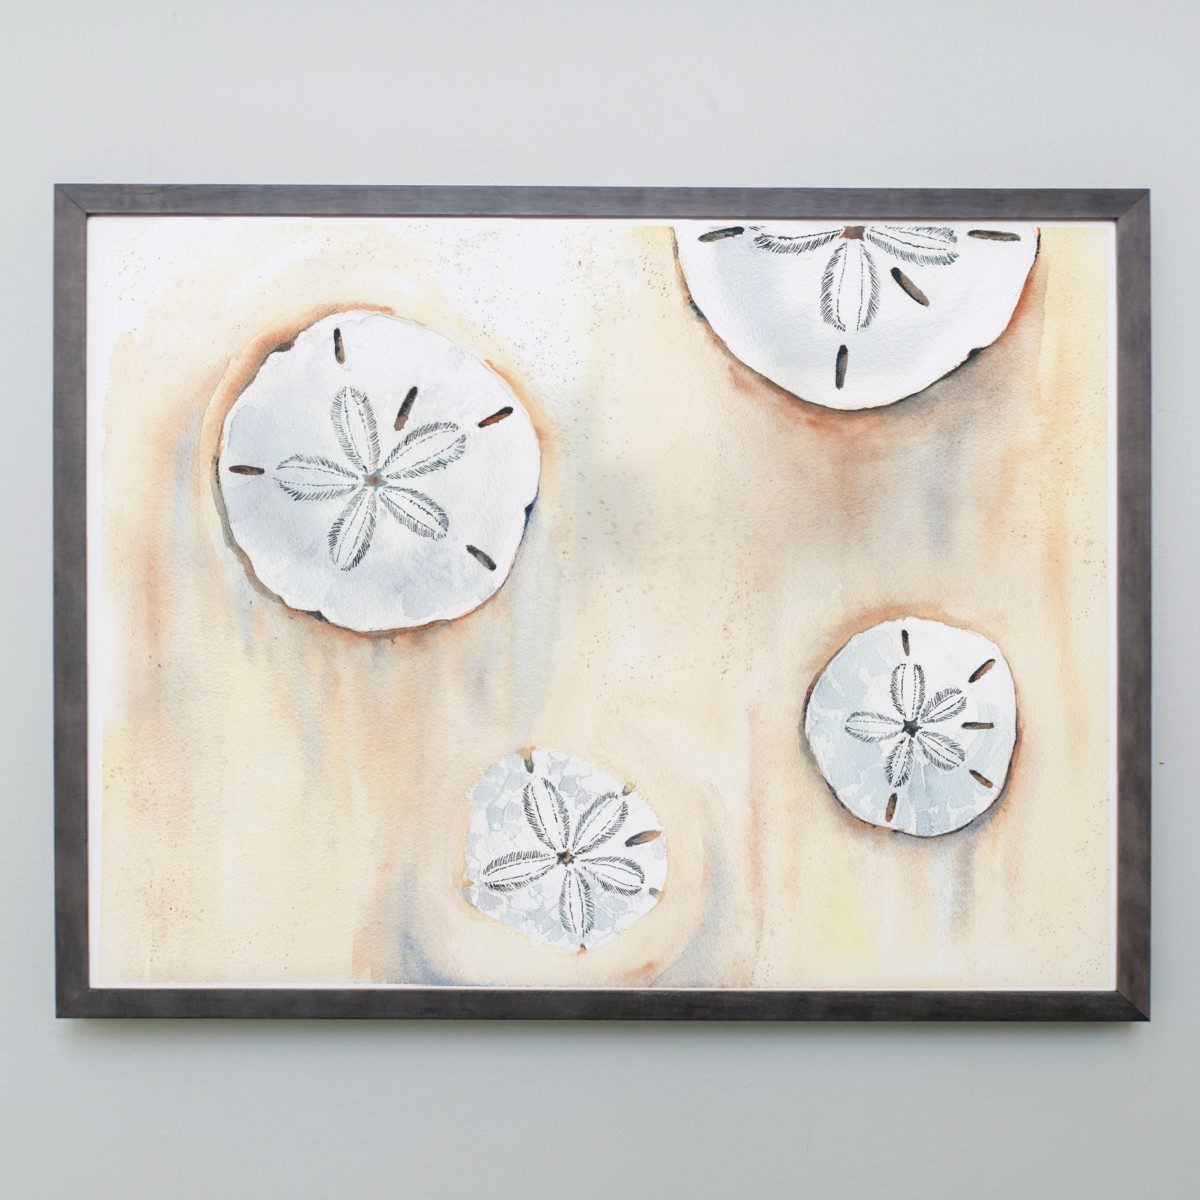 Watercolor of sand dollars in a gray frame